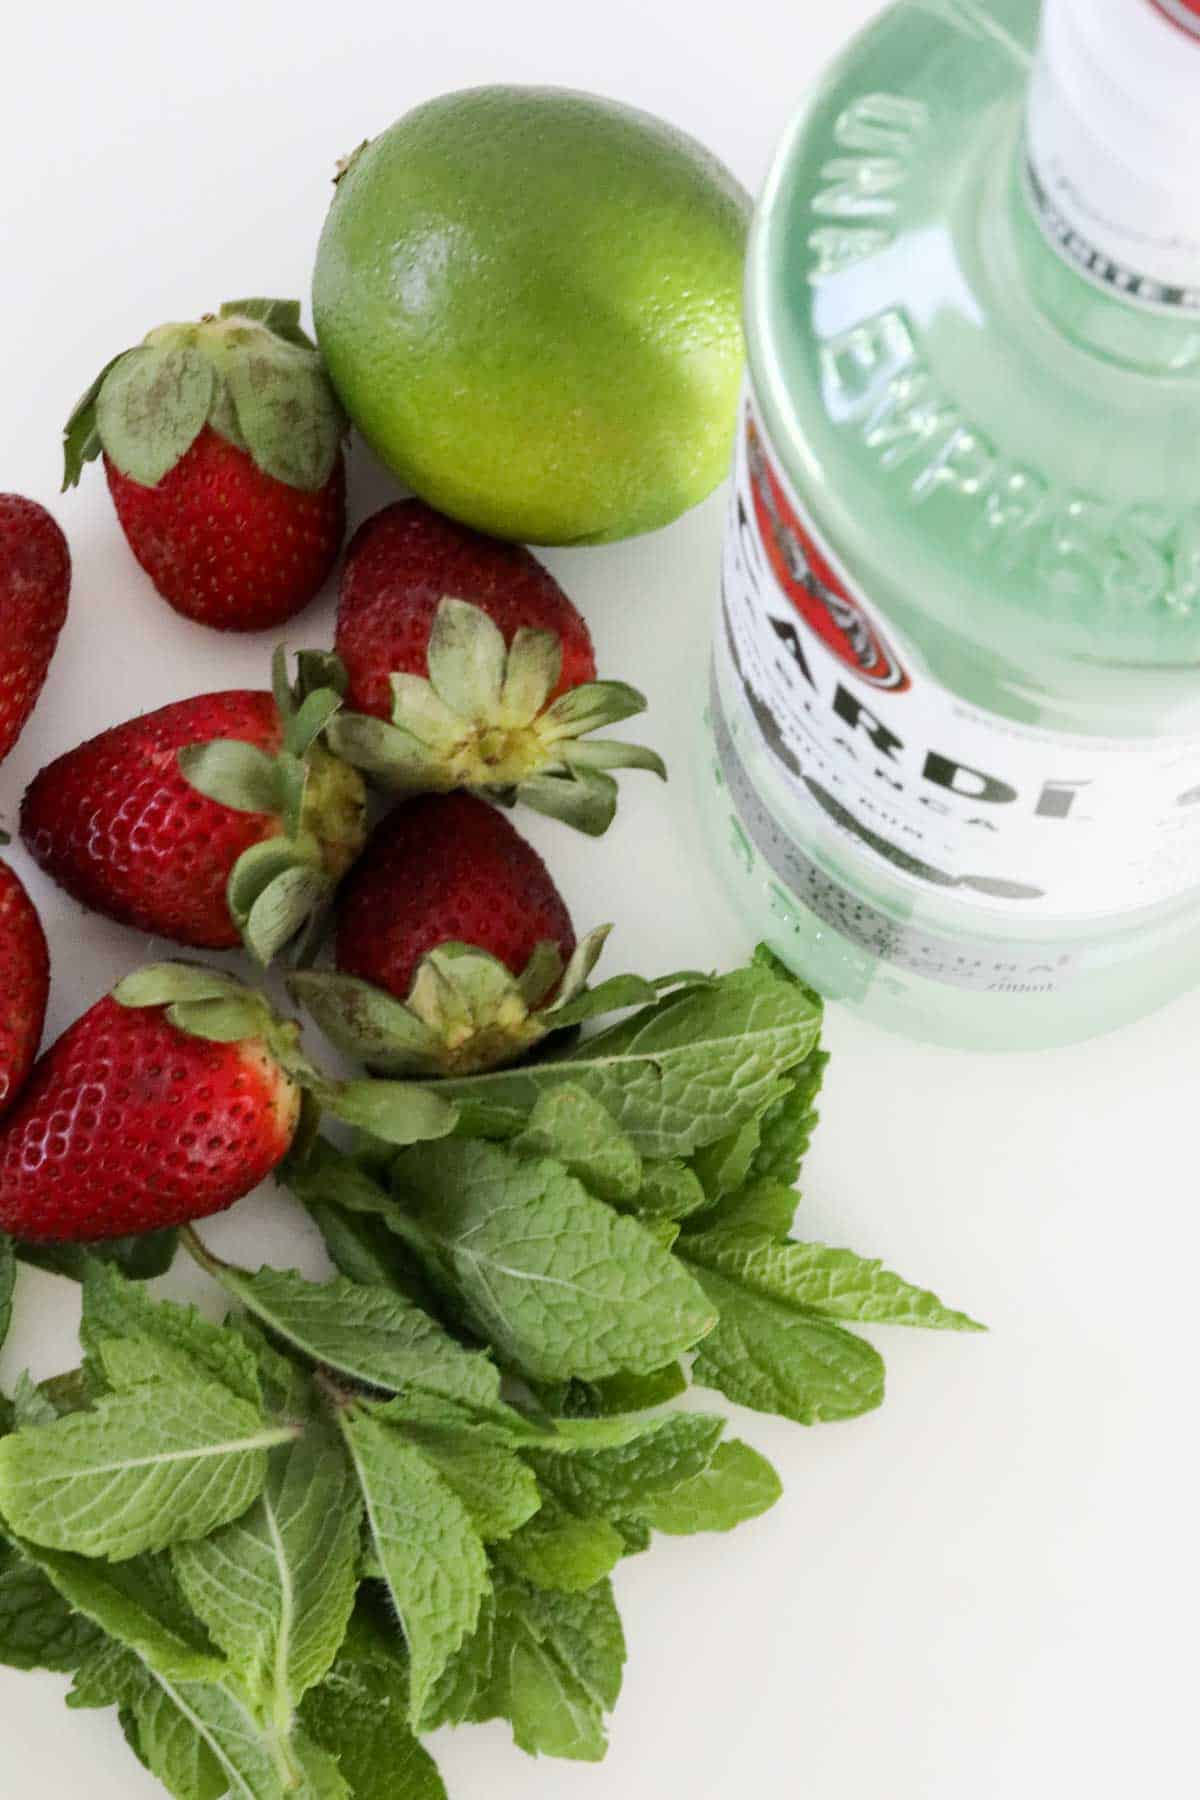 Bacardi rum, fresh mint leaves, lime and strawberries, ingredients used to make the cocktail.